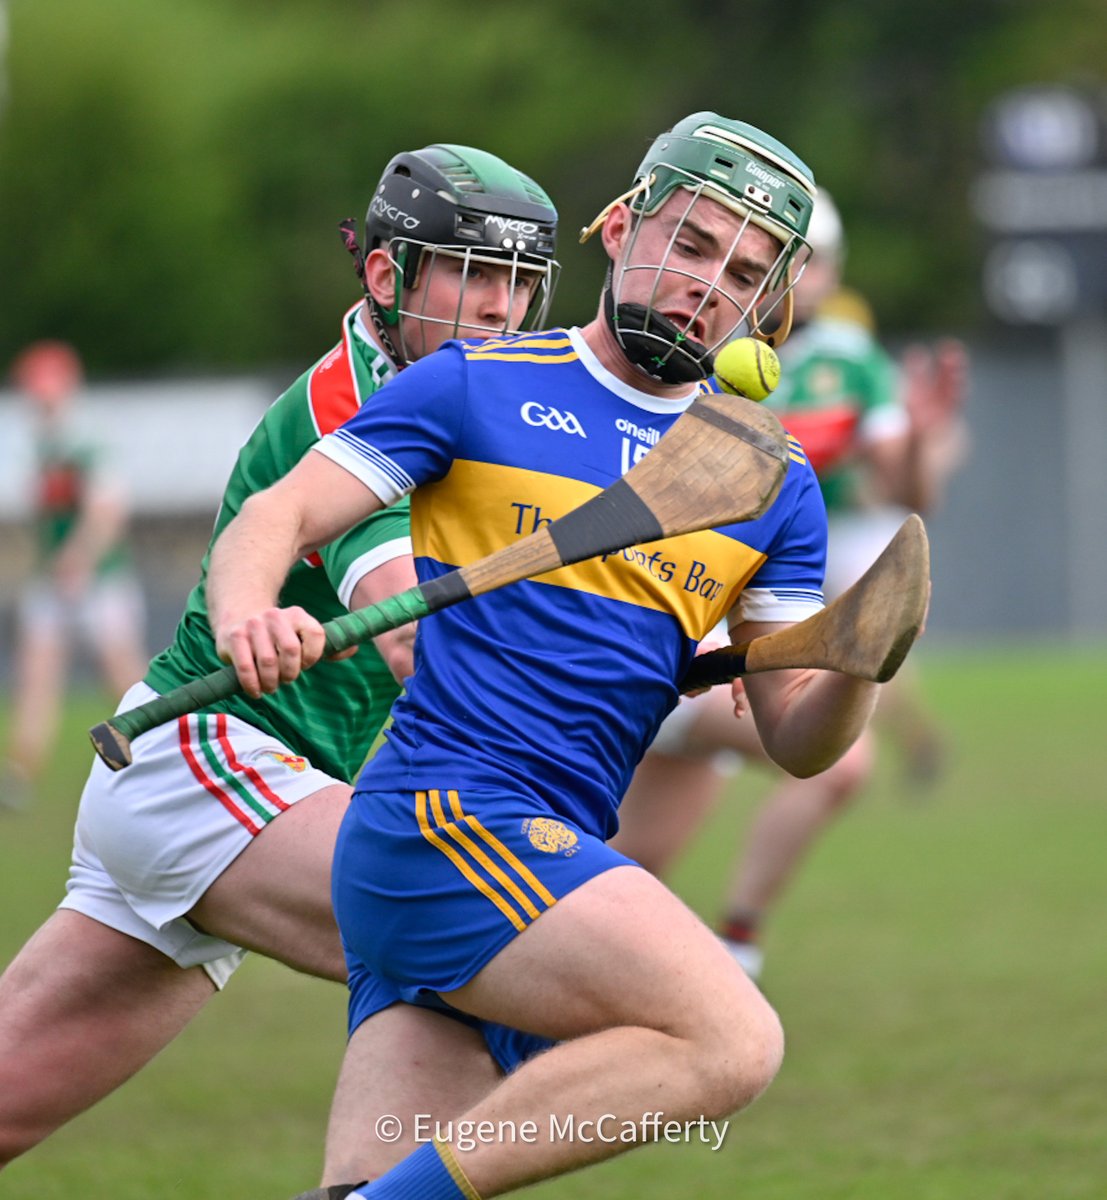 Newmarket’s Peter Power in action against Cillian O’Gara from Clooney-Quin in the Clare Cup Div 1A, round 5. At halftime it’s @NOFGAA 1-11 @ClooneyQuinnGAA 1-10. Photograph by @eugemccafferty.